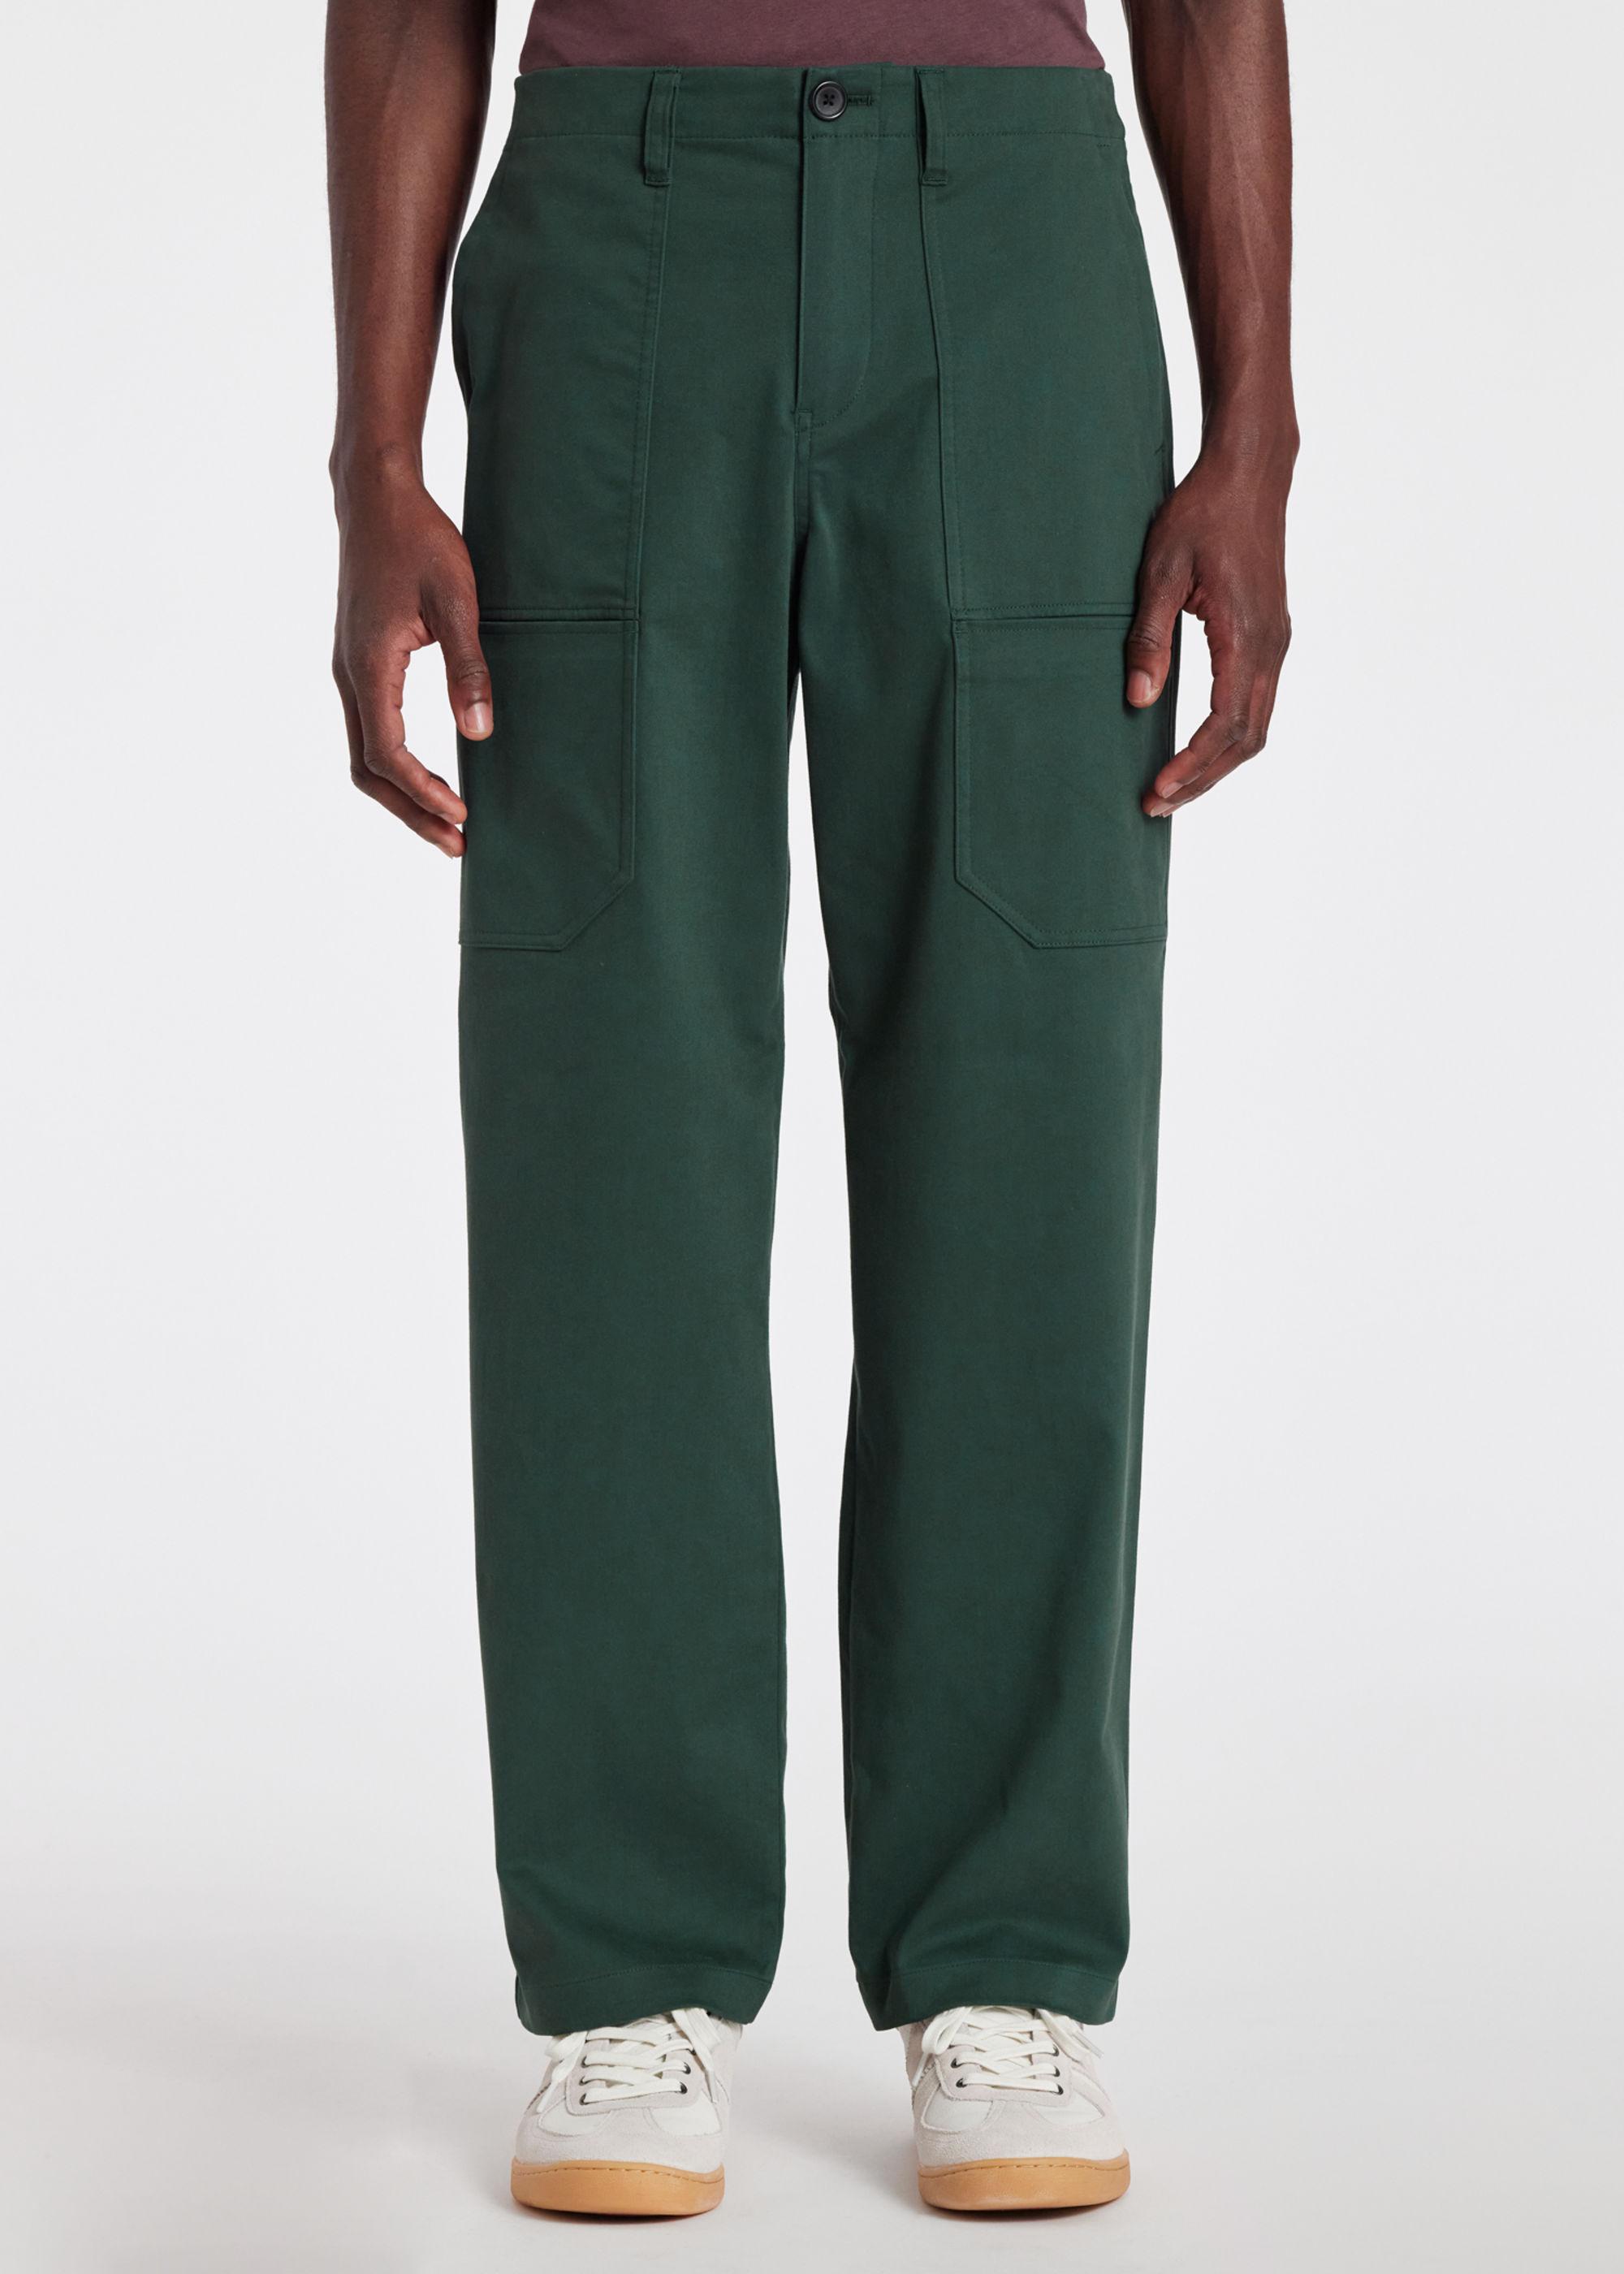 Paul Smith Mens Loose Fit Tapered Chino in Green for Men | Lyst UK